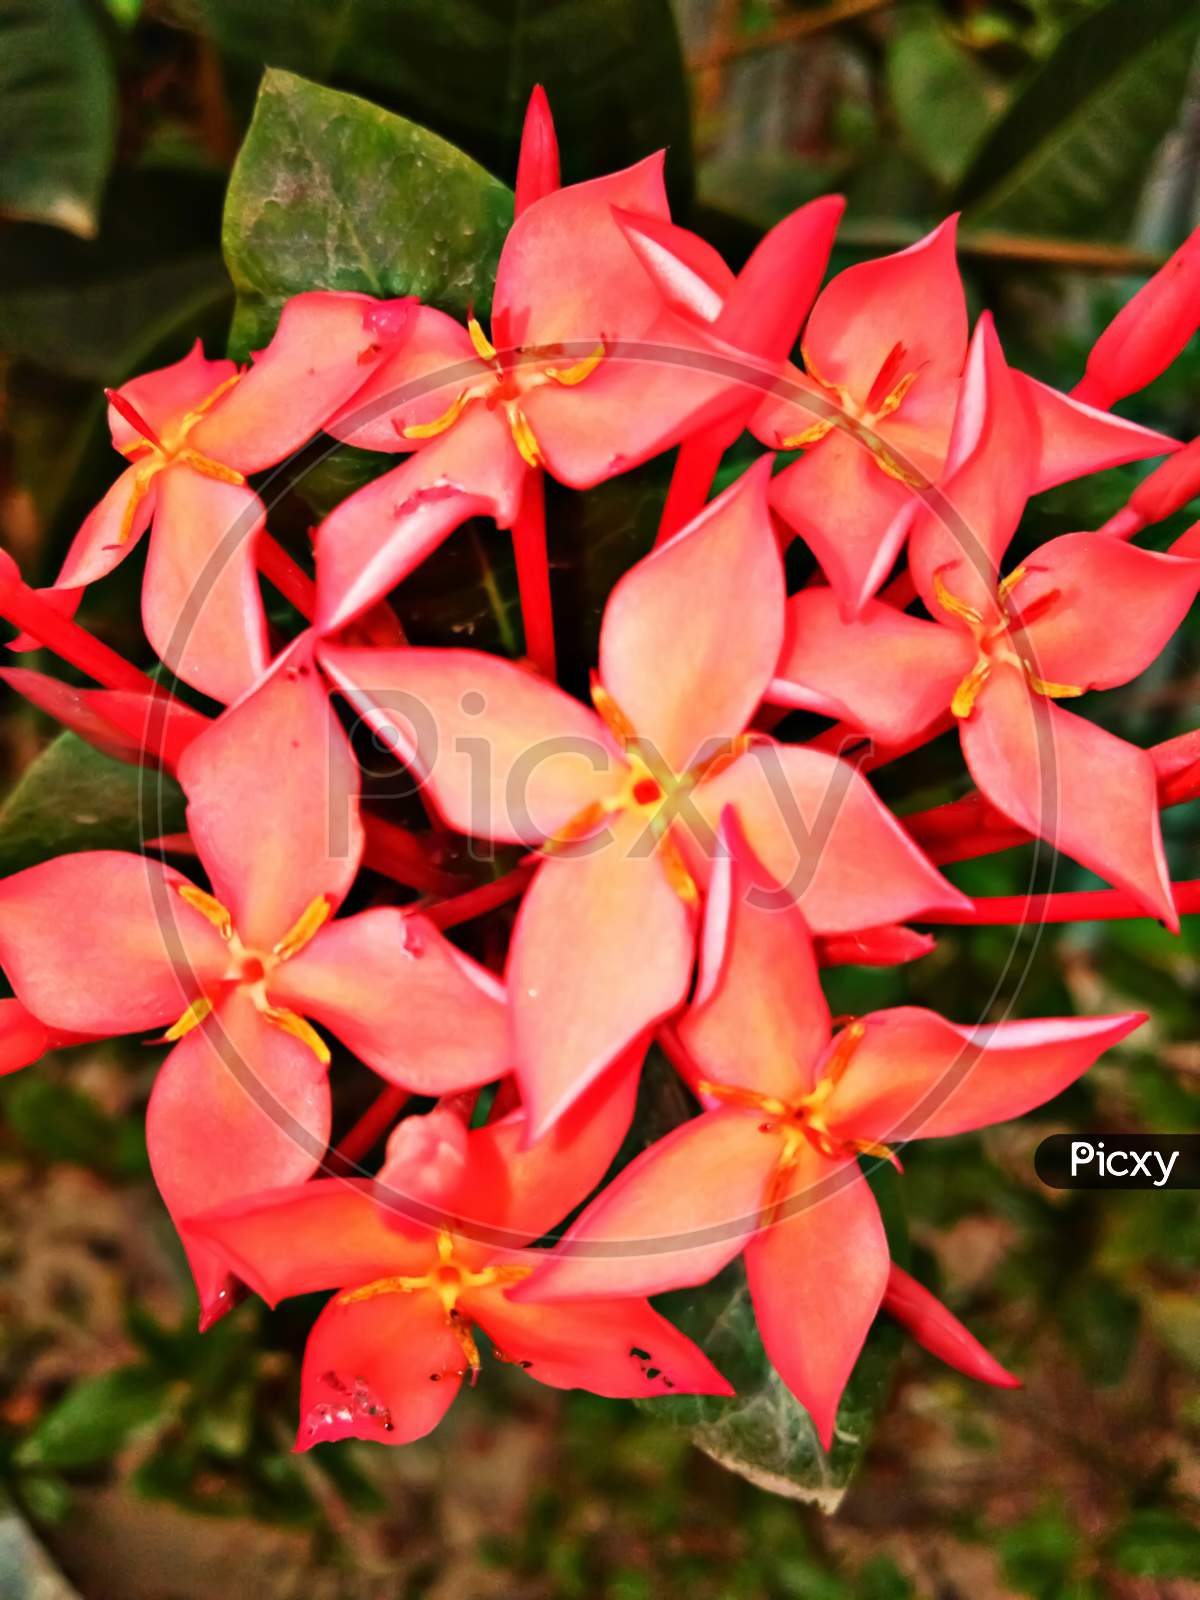 Ixora flowers background, red natural flowers.